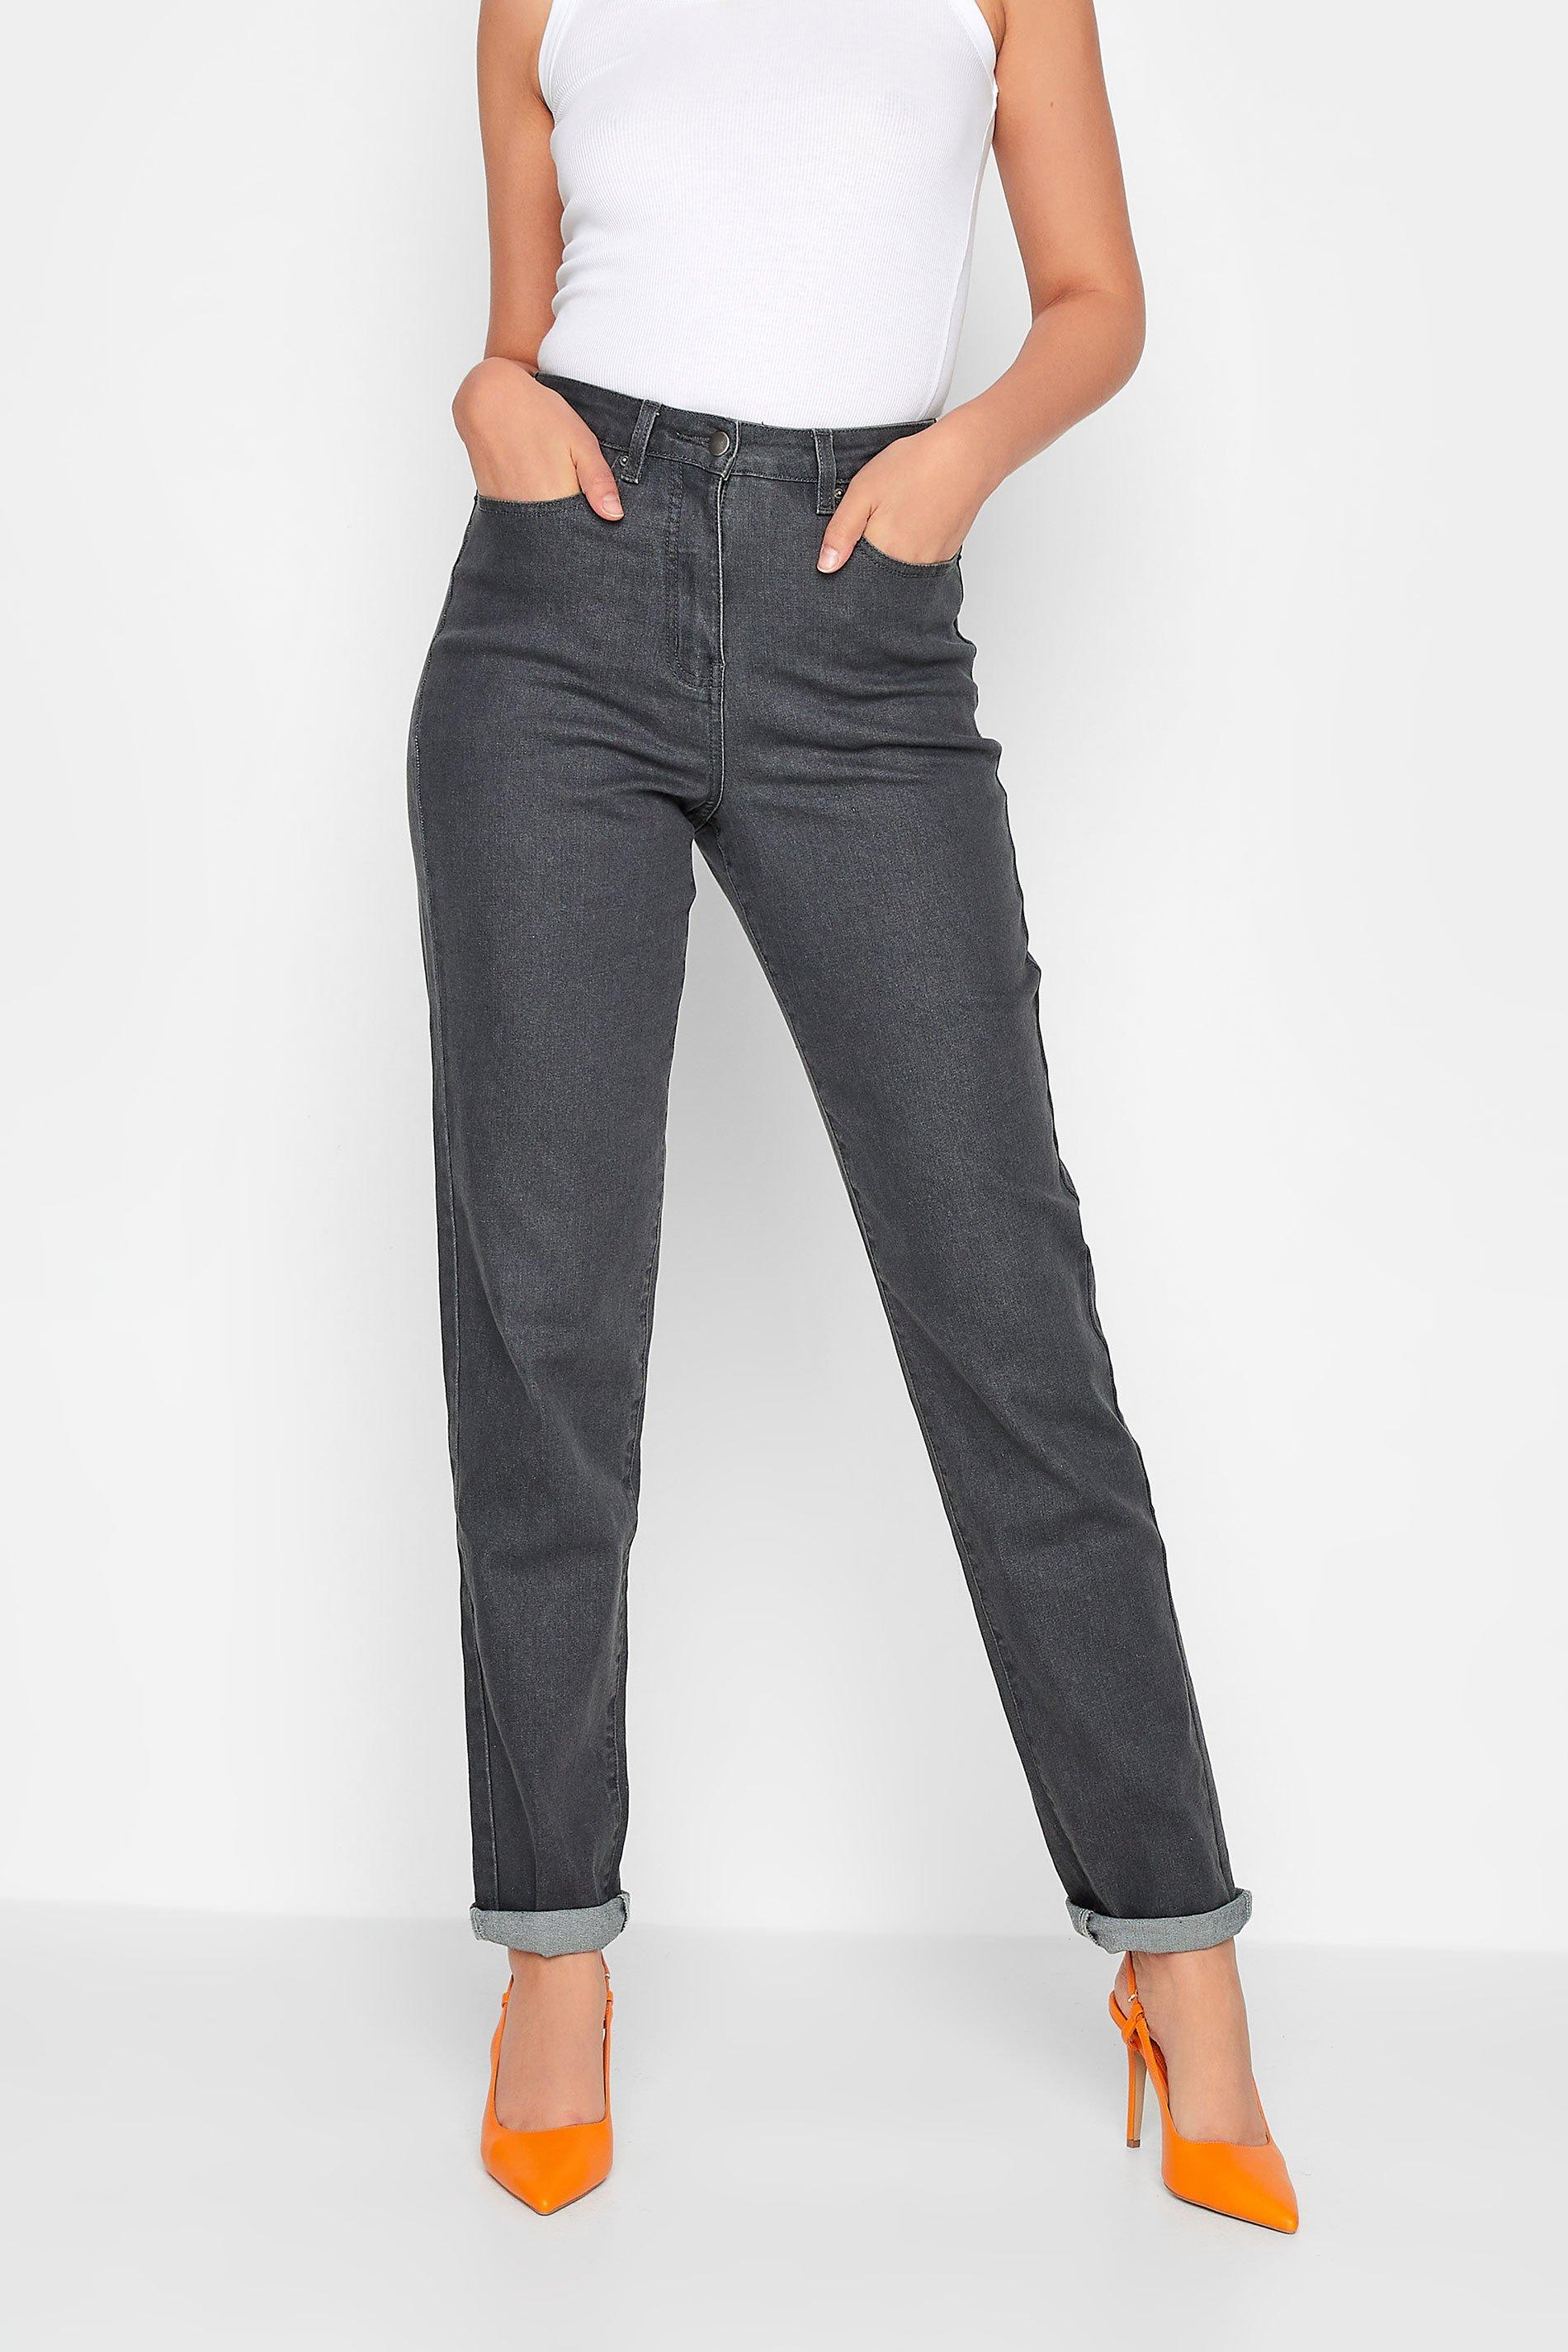 Jeans | Tall Mom Jeans | Long Tall Sally